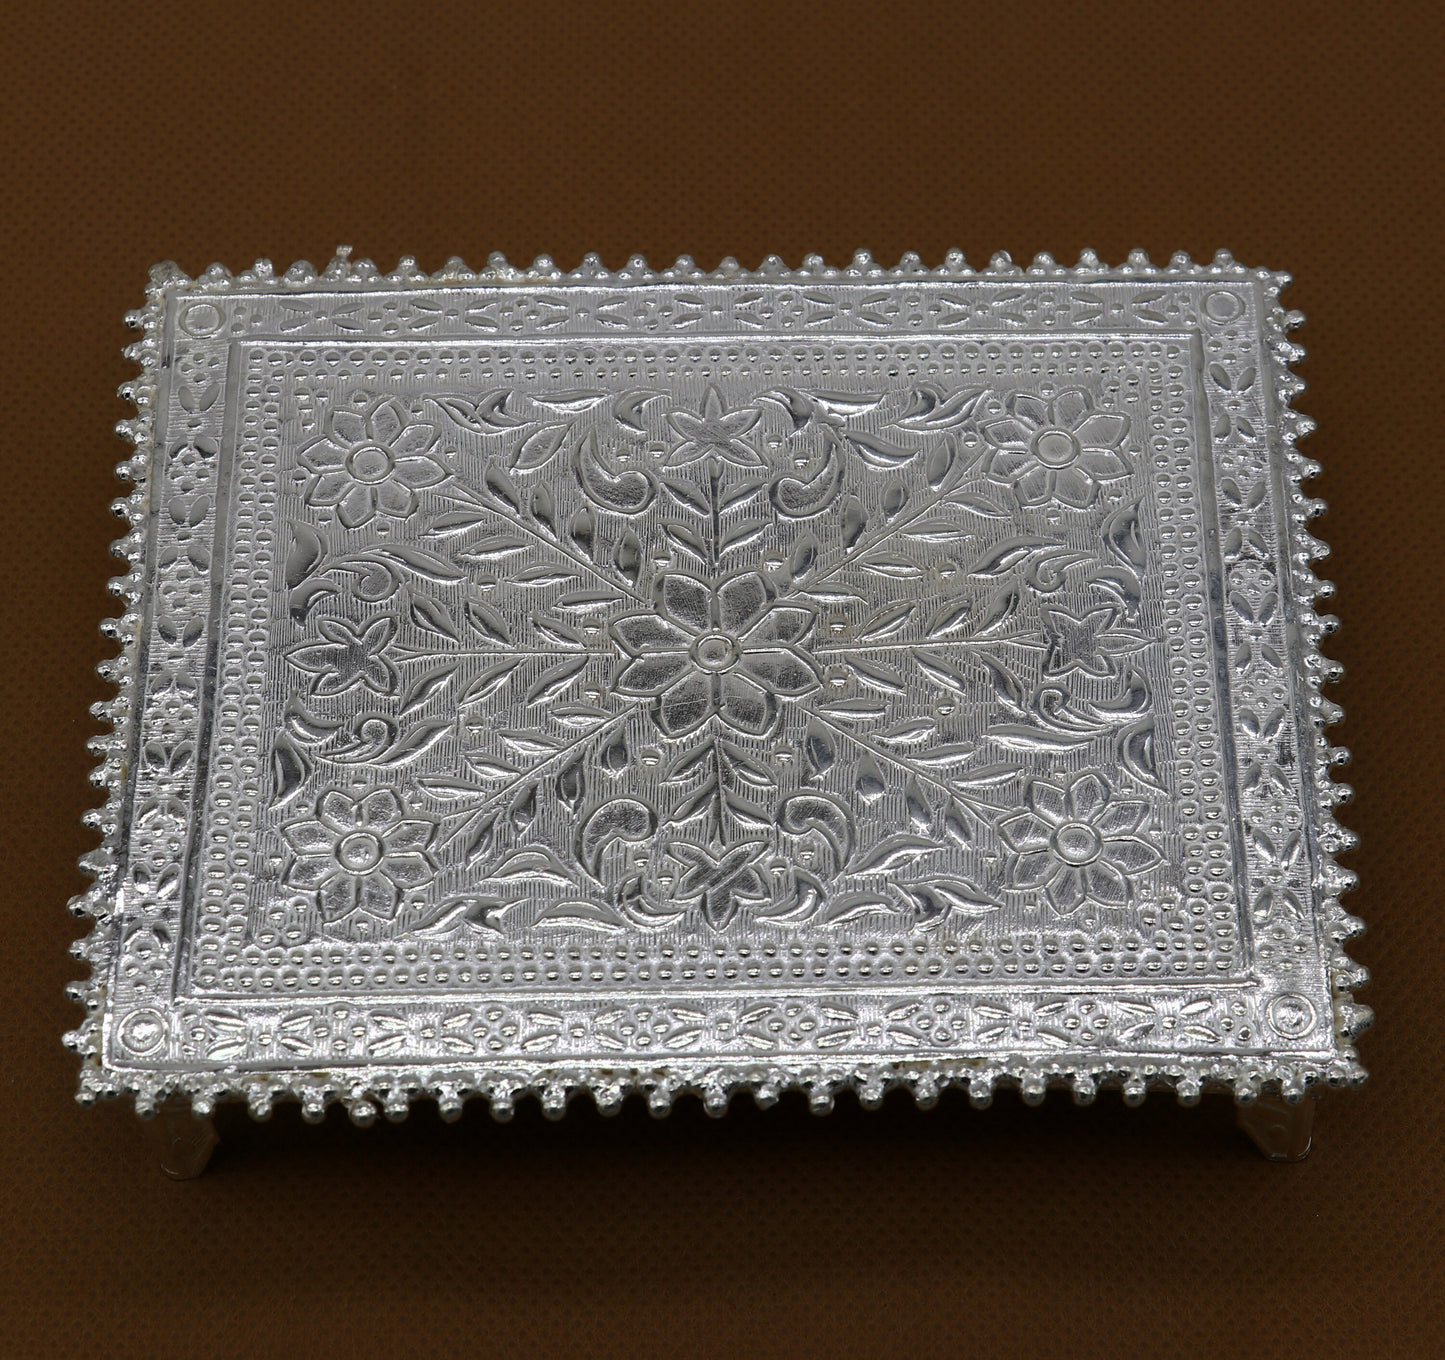 3.5"x4.5" Vintage design Sterling silver handmade customize small rectangle shape table/bazot/chouki, excellent home puja utensils su1265 - TRIBAL ORNAMENTS